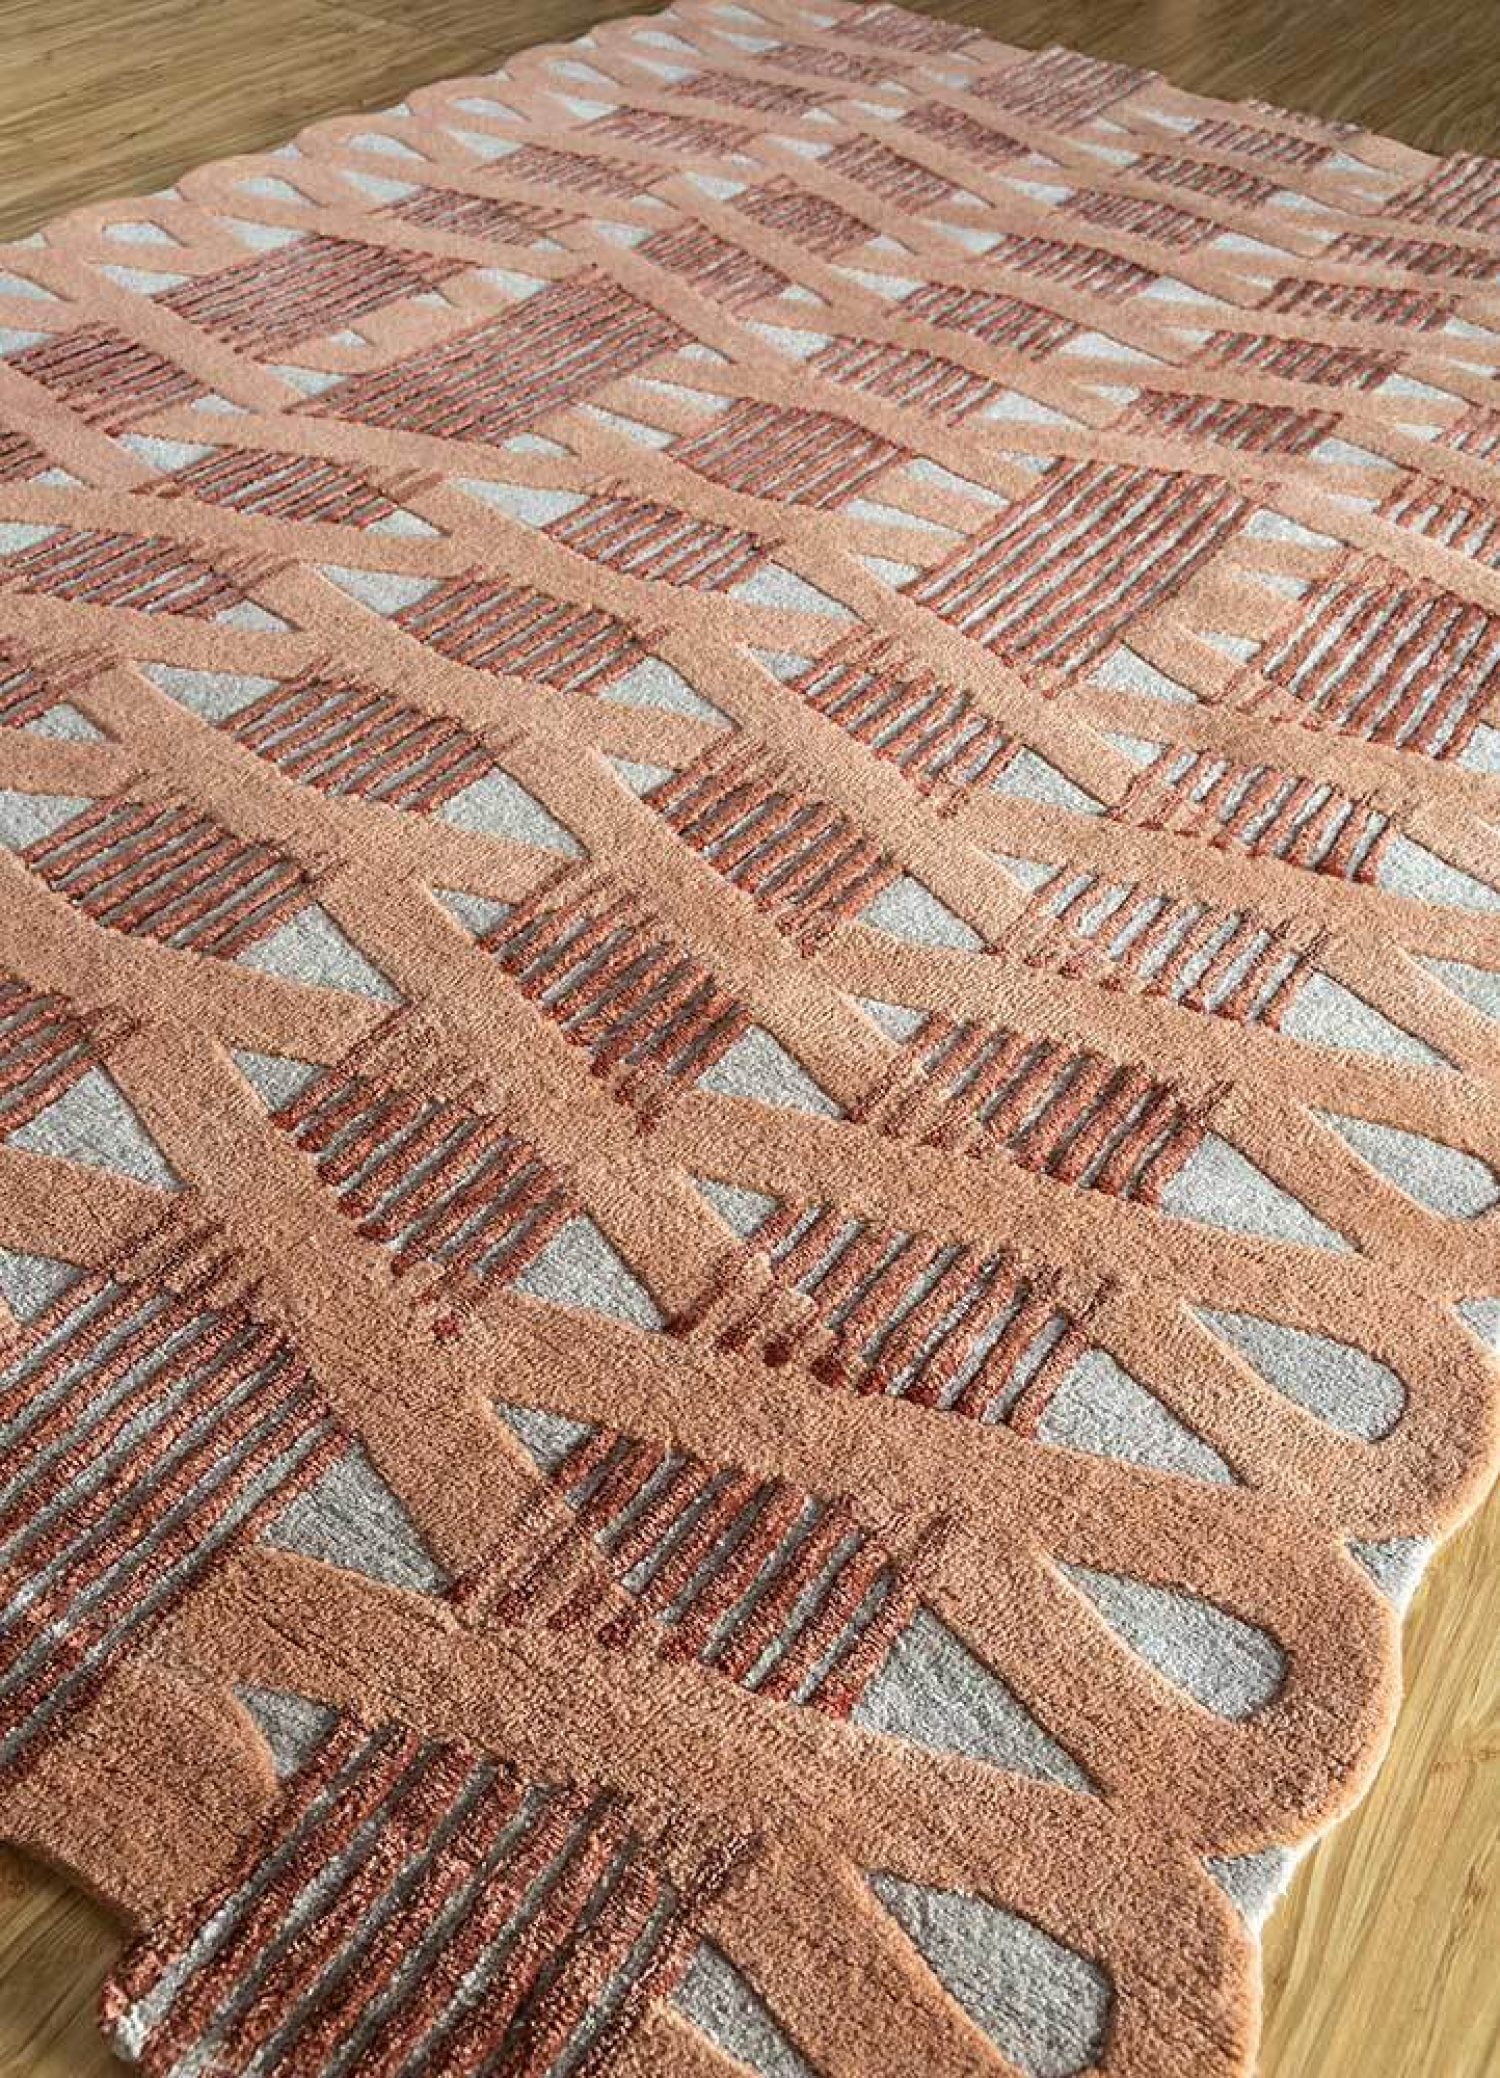 This rug highlights the mystifying charm of step-wells in India.